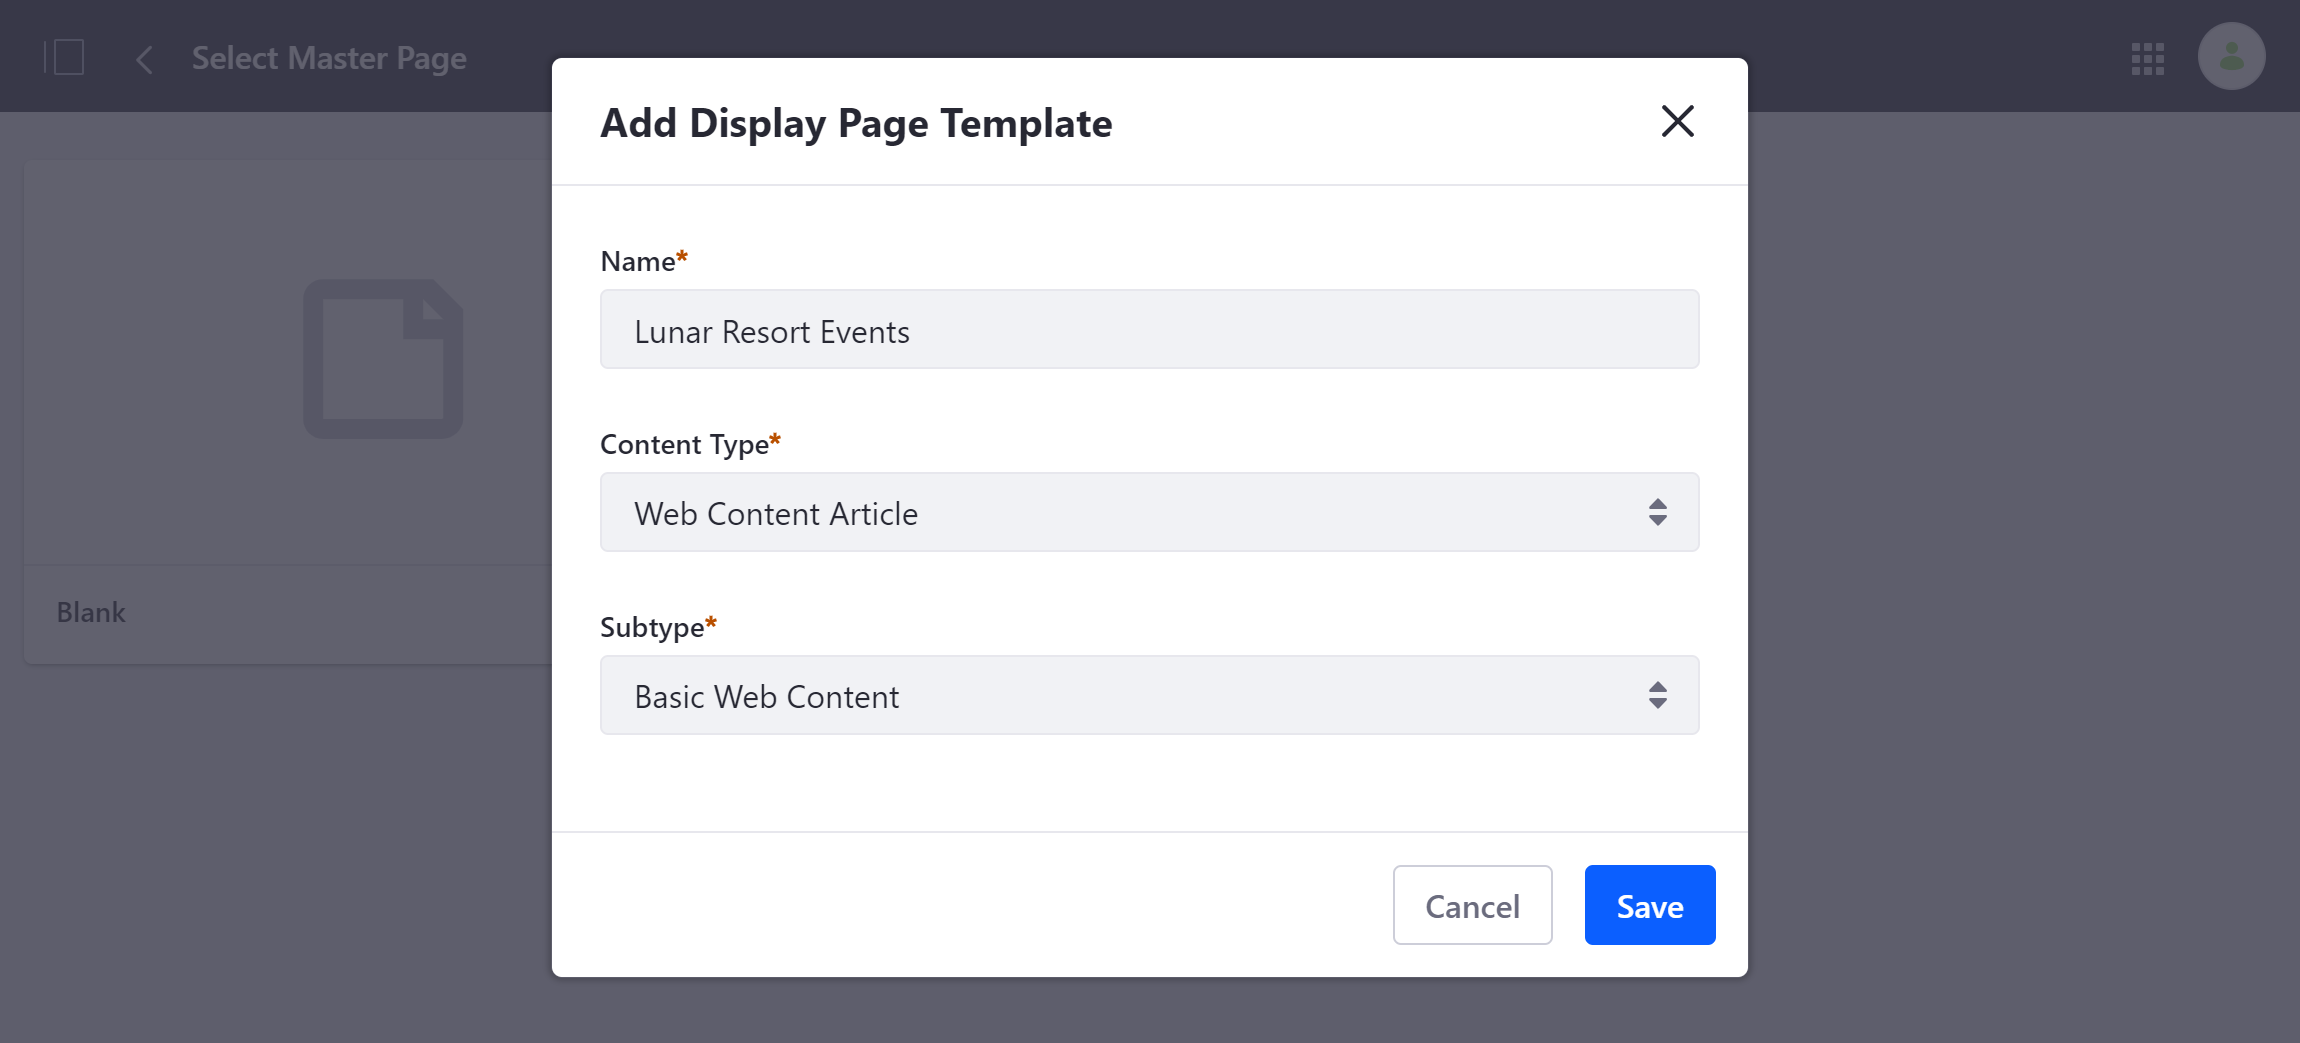 Select the content type and subtype for your new template.